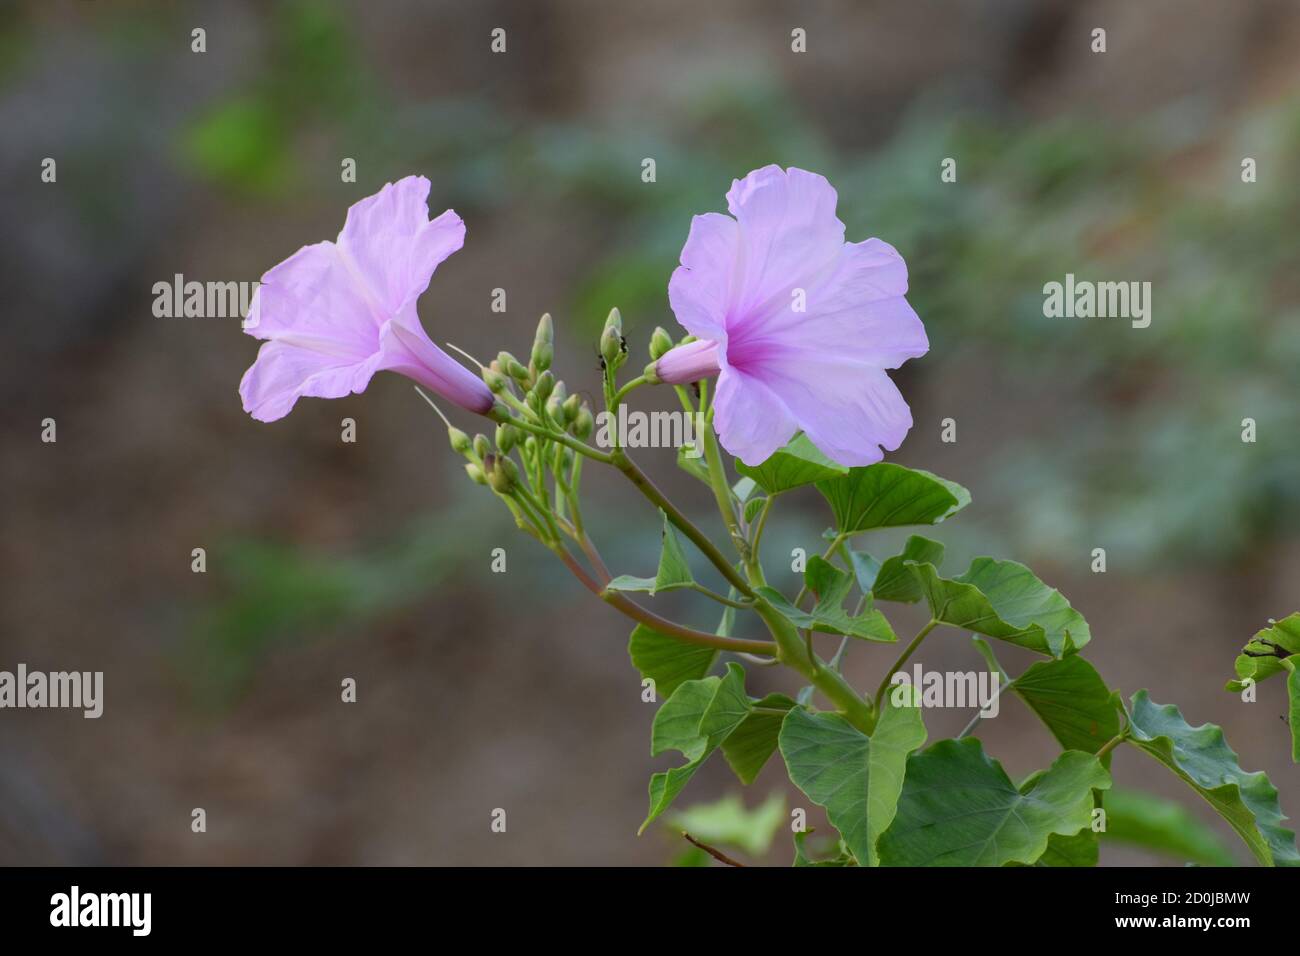 Beautiful fresh pink morning glory (ipomoea carnea) plant with flower blossoms and buds in natural background, botanical garden Stock Photo